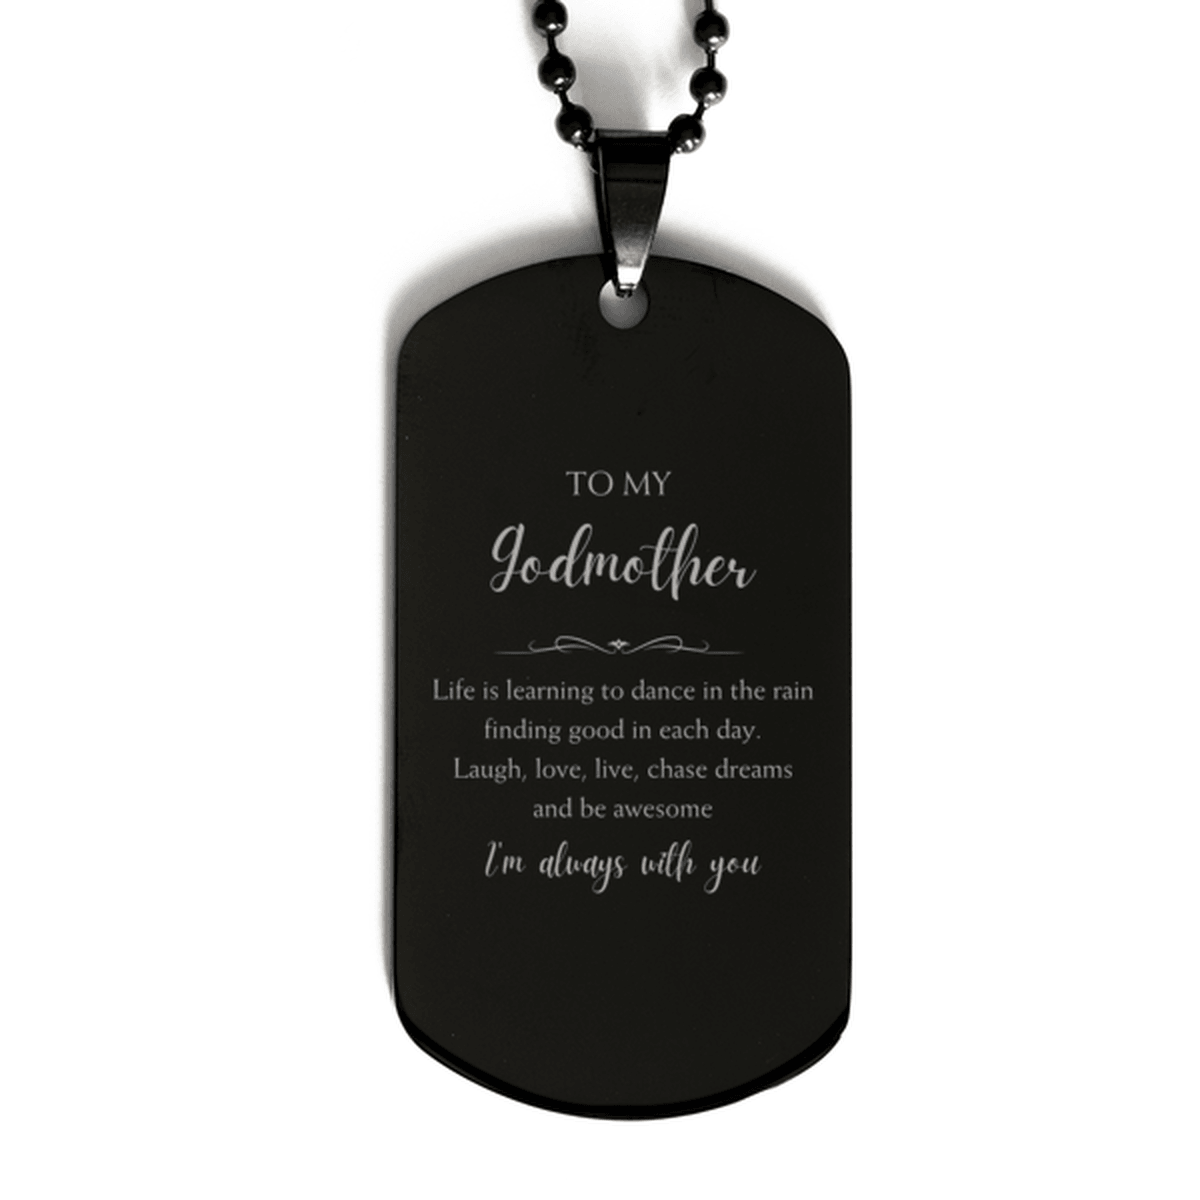 Godmother Christmas Perfect Gifts, Godmother Black Dog Tag, Motivational Godmother Engraved Gifts, Birthday Gifts For Godmother, To My Godmother Life is learning to dance in the rain, finding good in each day. I'm always with you